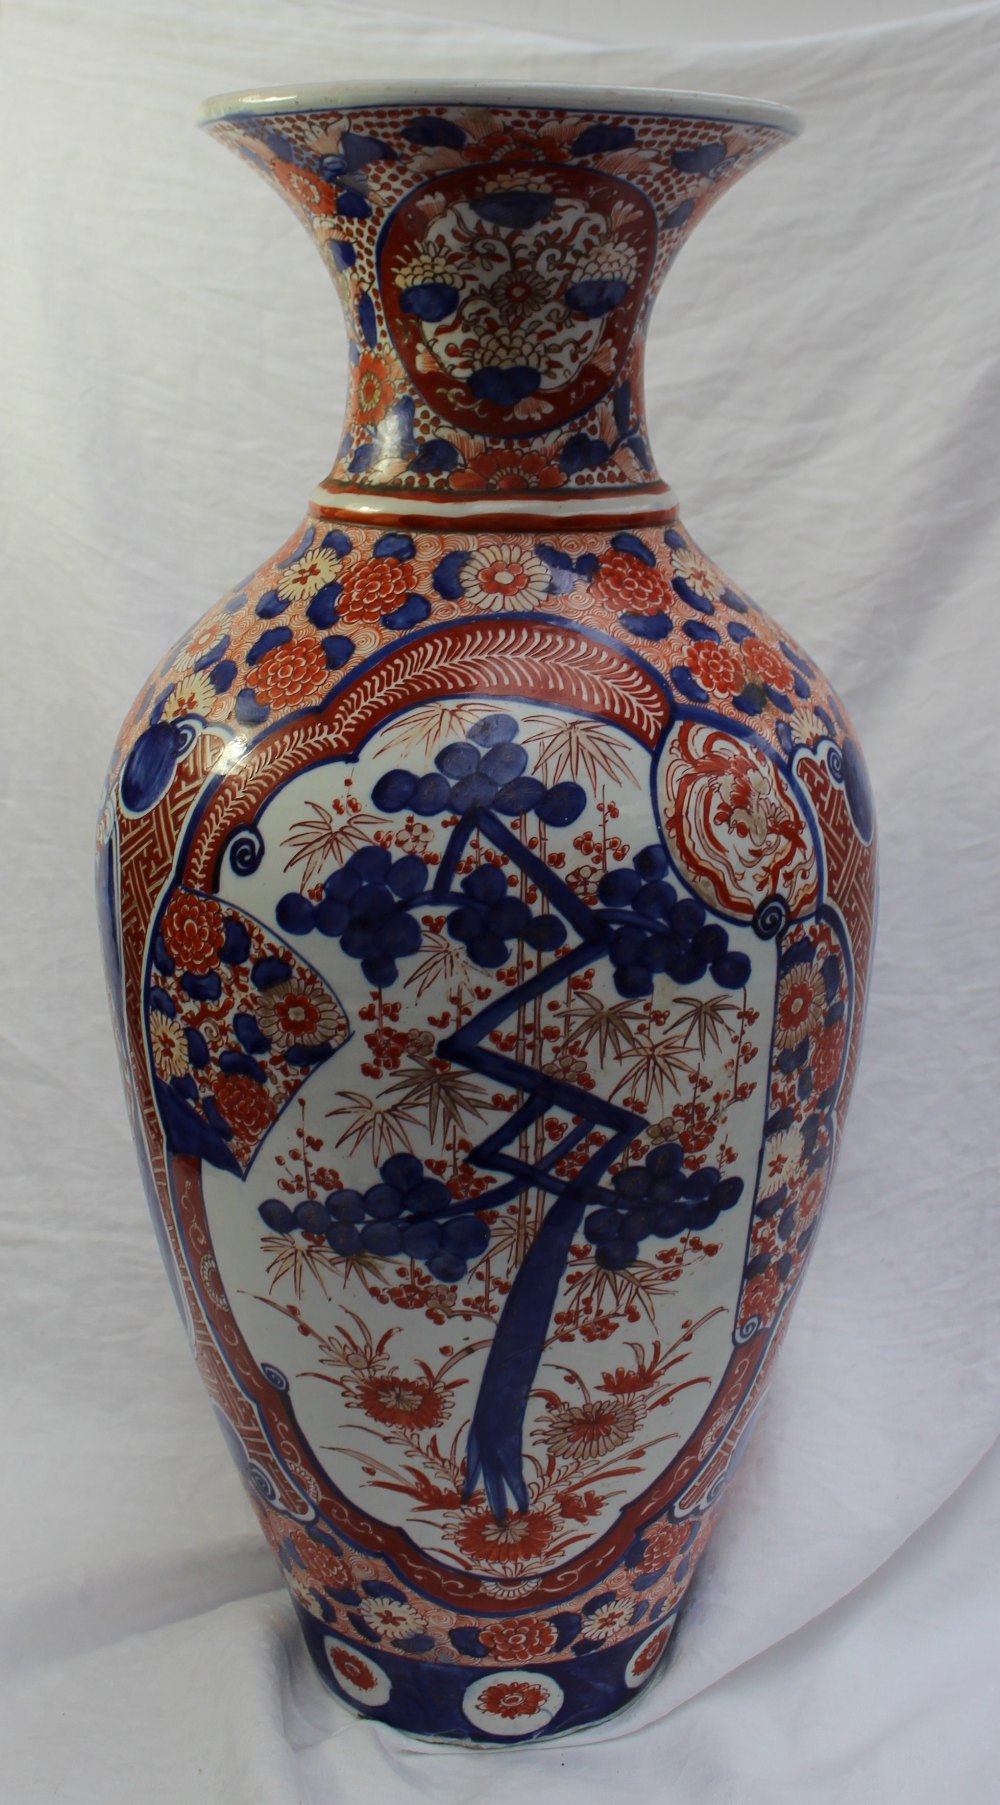 A large 19th century Japanese Imari porcelain baluster vase, decorated with prunus blossom and - Image 2 of 6